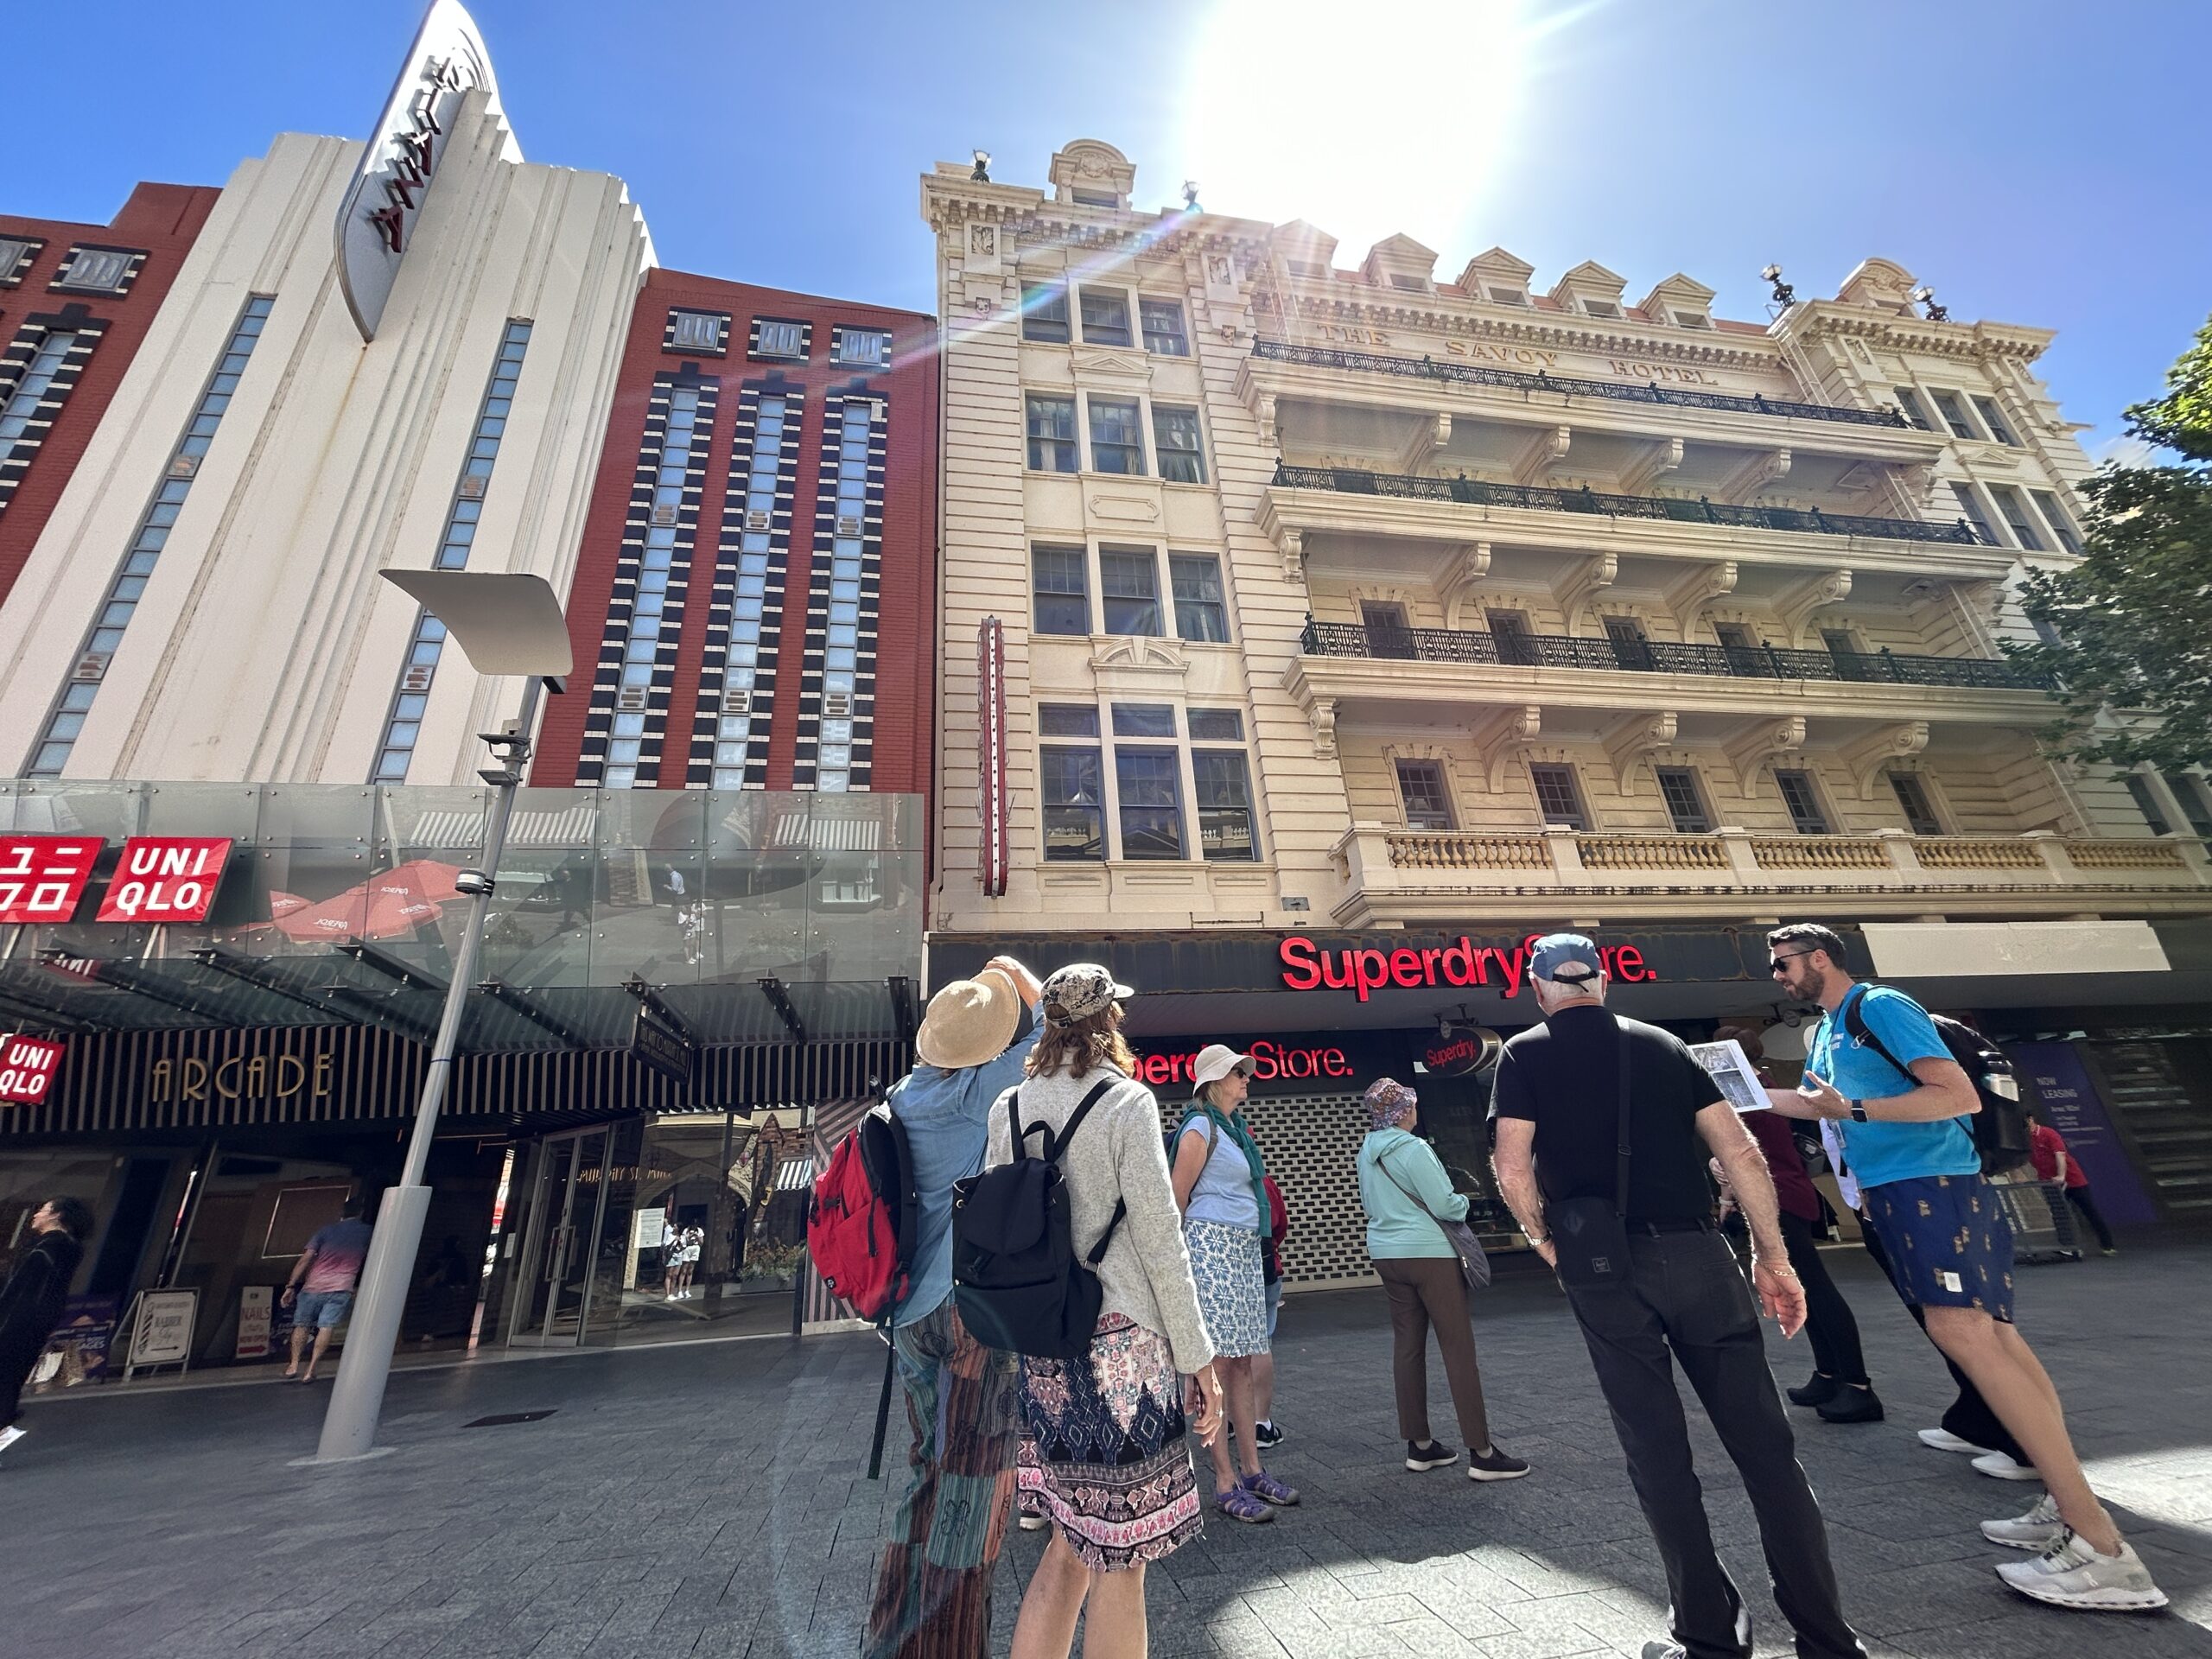 THE ULTIMATE PERTH WALKING TOUR: History, Architecture, Art, Local Insights + More!